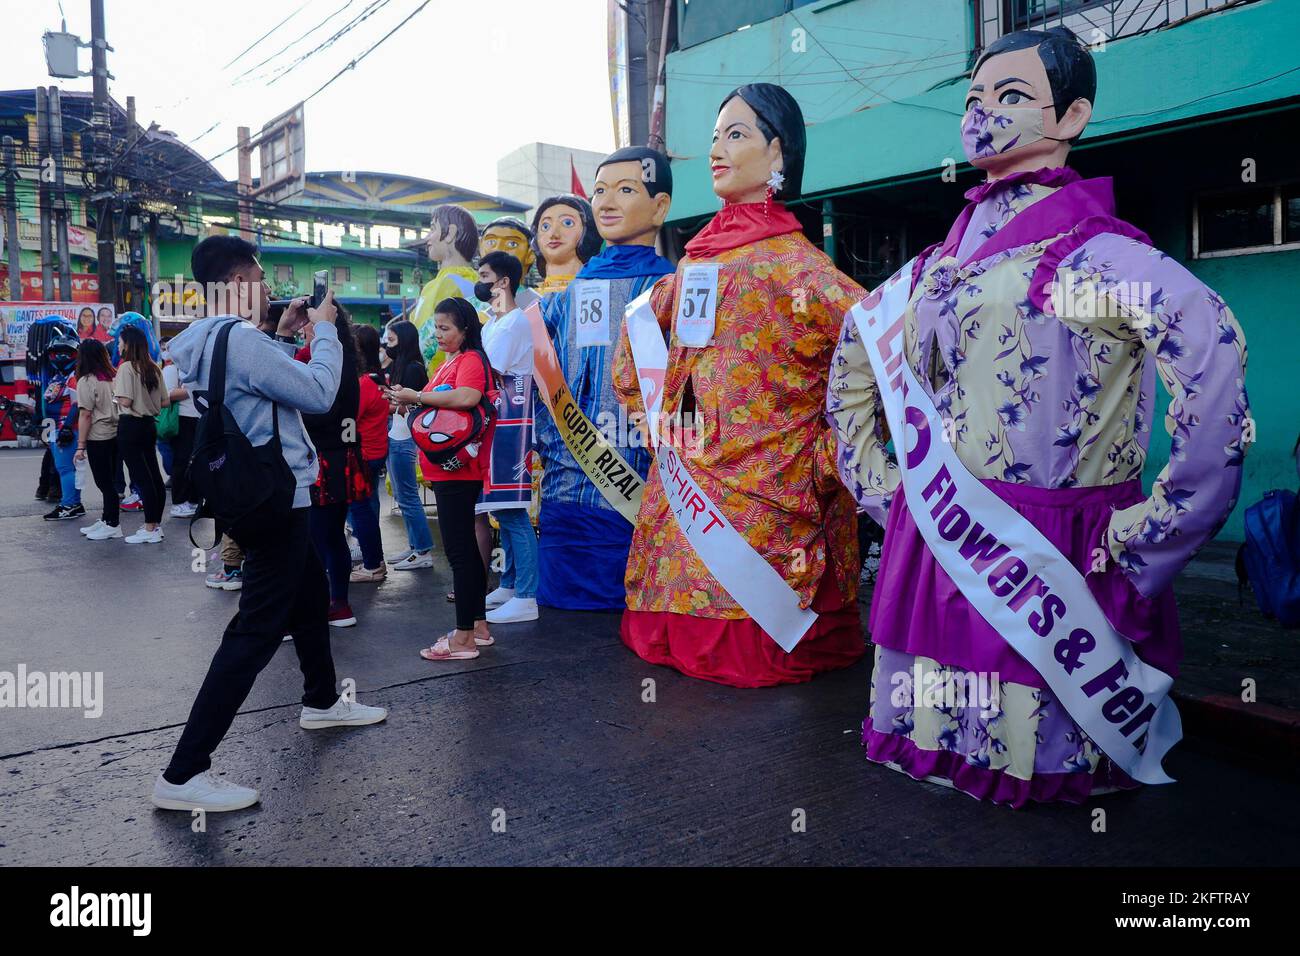 Angono, Rizal, Philippines. 20th Nov, 2022. The parade of the giant puppets in the art capital of the Philippines is back after two years of pandemic. The Higantes (giant) Festival parades the streets of Angono, Rizal province. The paper mache head puppets were originally done to put to shame corrupt officials during the Spanish rulership. Now, the Higantes came a long way and evolve into a festival on modern times from the Spanish era. The festival brings joy and entertainment to the town people of Angono and to tourists. Now, they wear a sash to represent someone or promote something with Stock Photo